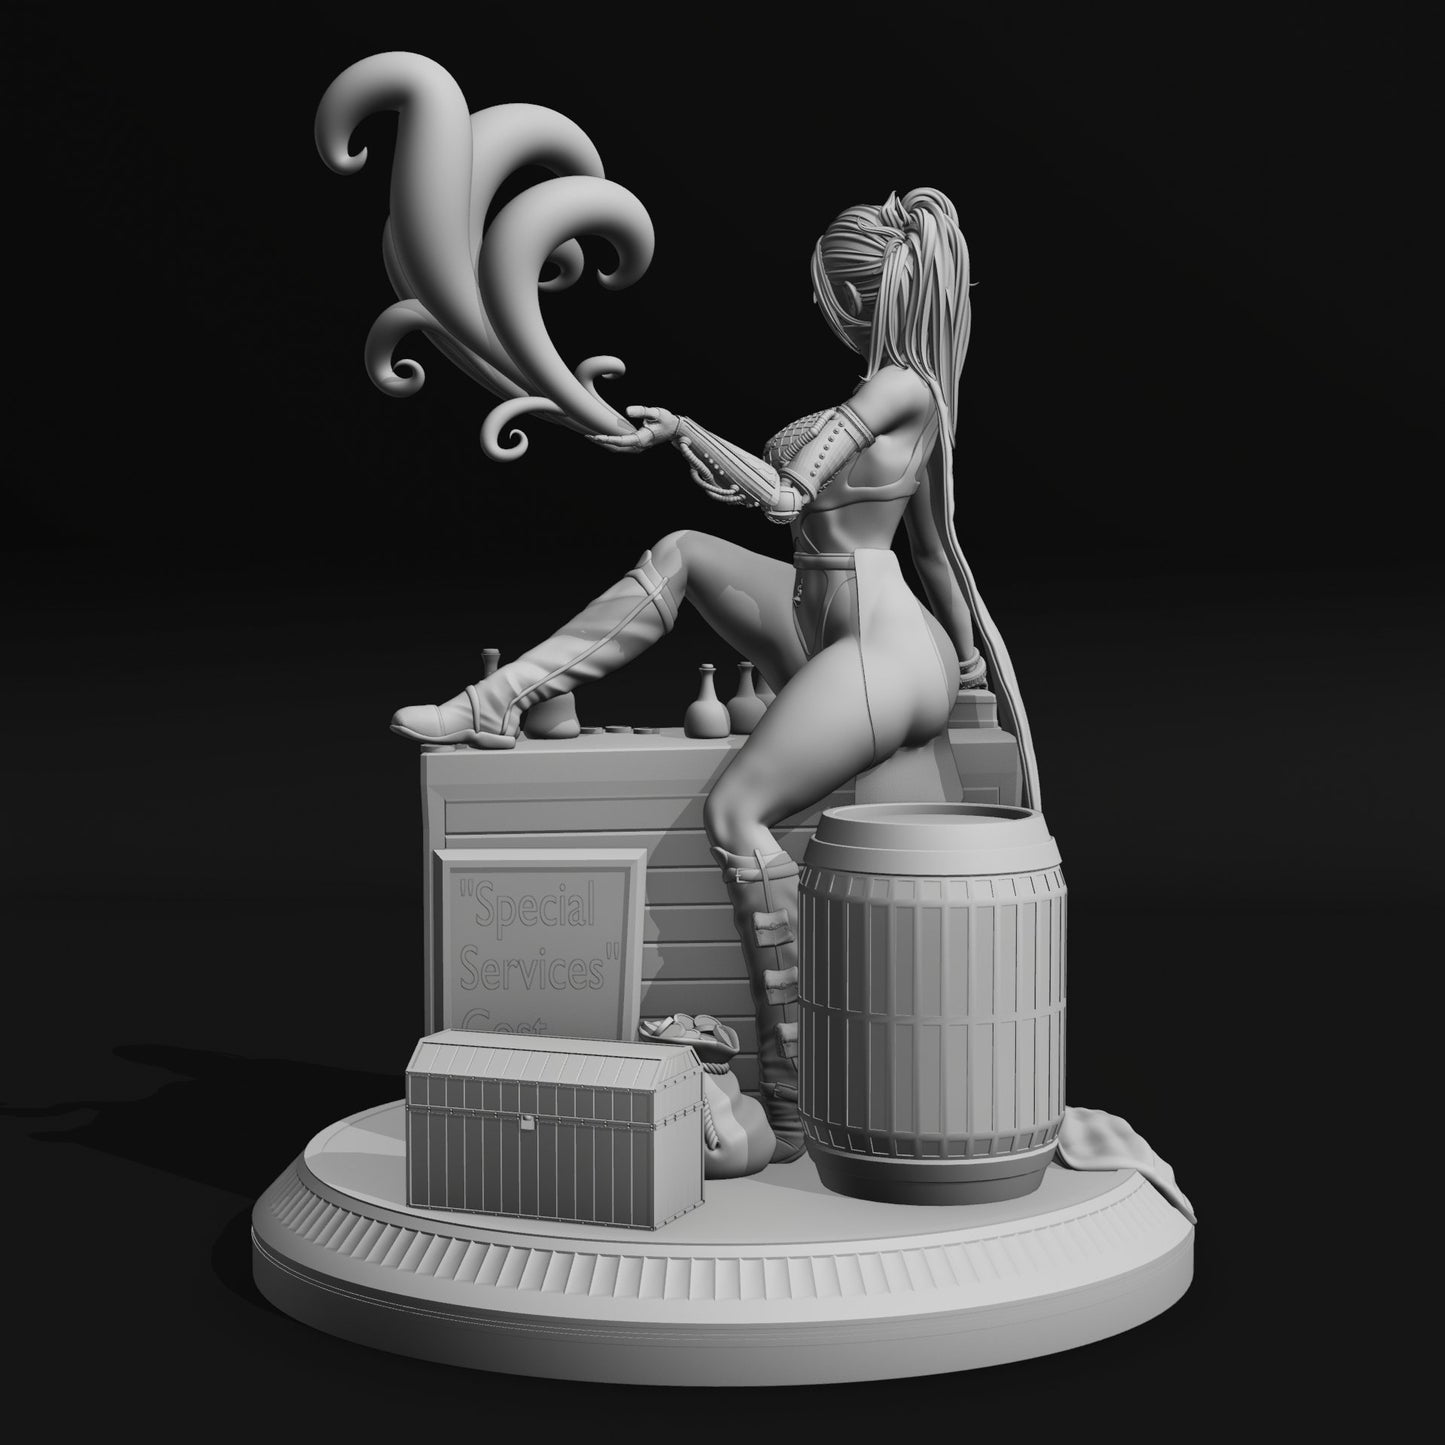 Wicked Shopkeep NSFW 3d Printed miniature FanArt by QB Works Scaled Collectables Statues & Figurines